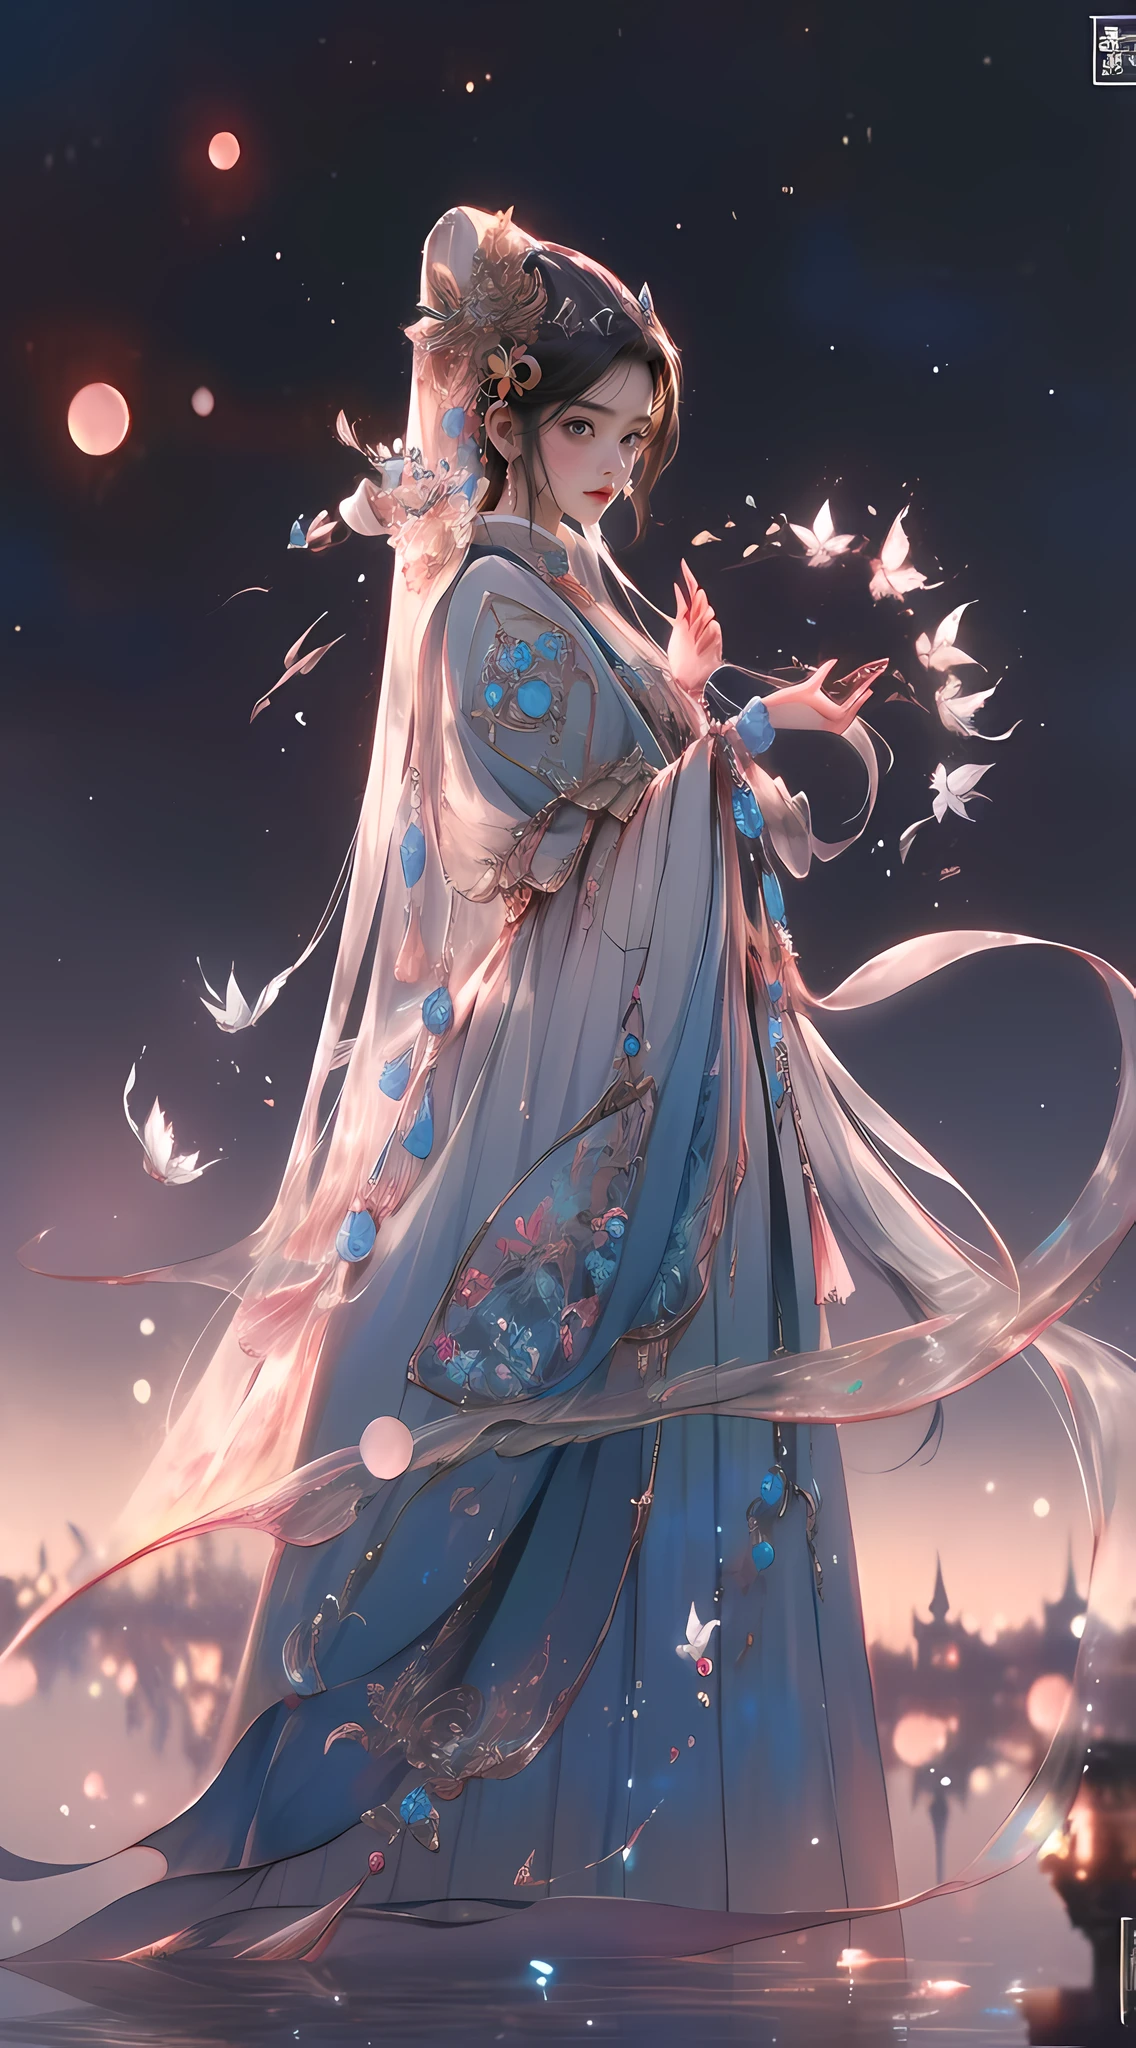 A woman in a blue dress，Holding a butterfly in his hand, Palace ， A girl in Hanfu, a beautiful fantasy empress, Princesa chinesa antiga, ((a beautiful fantasy empress)), 8K high quality detailed art, China Princess, Guviz-style artwork, Chinese fantasy, A beautiful artwork illustration, Guviz, Beautiful digital artwork